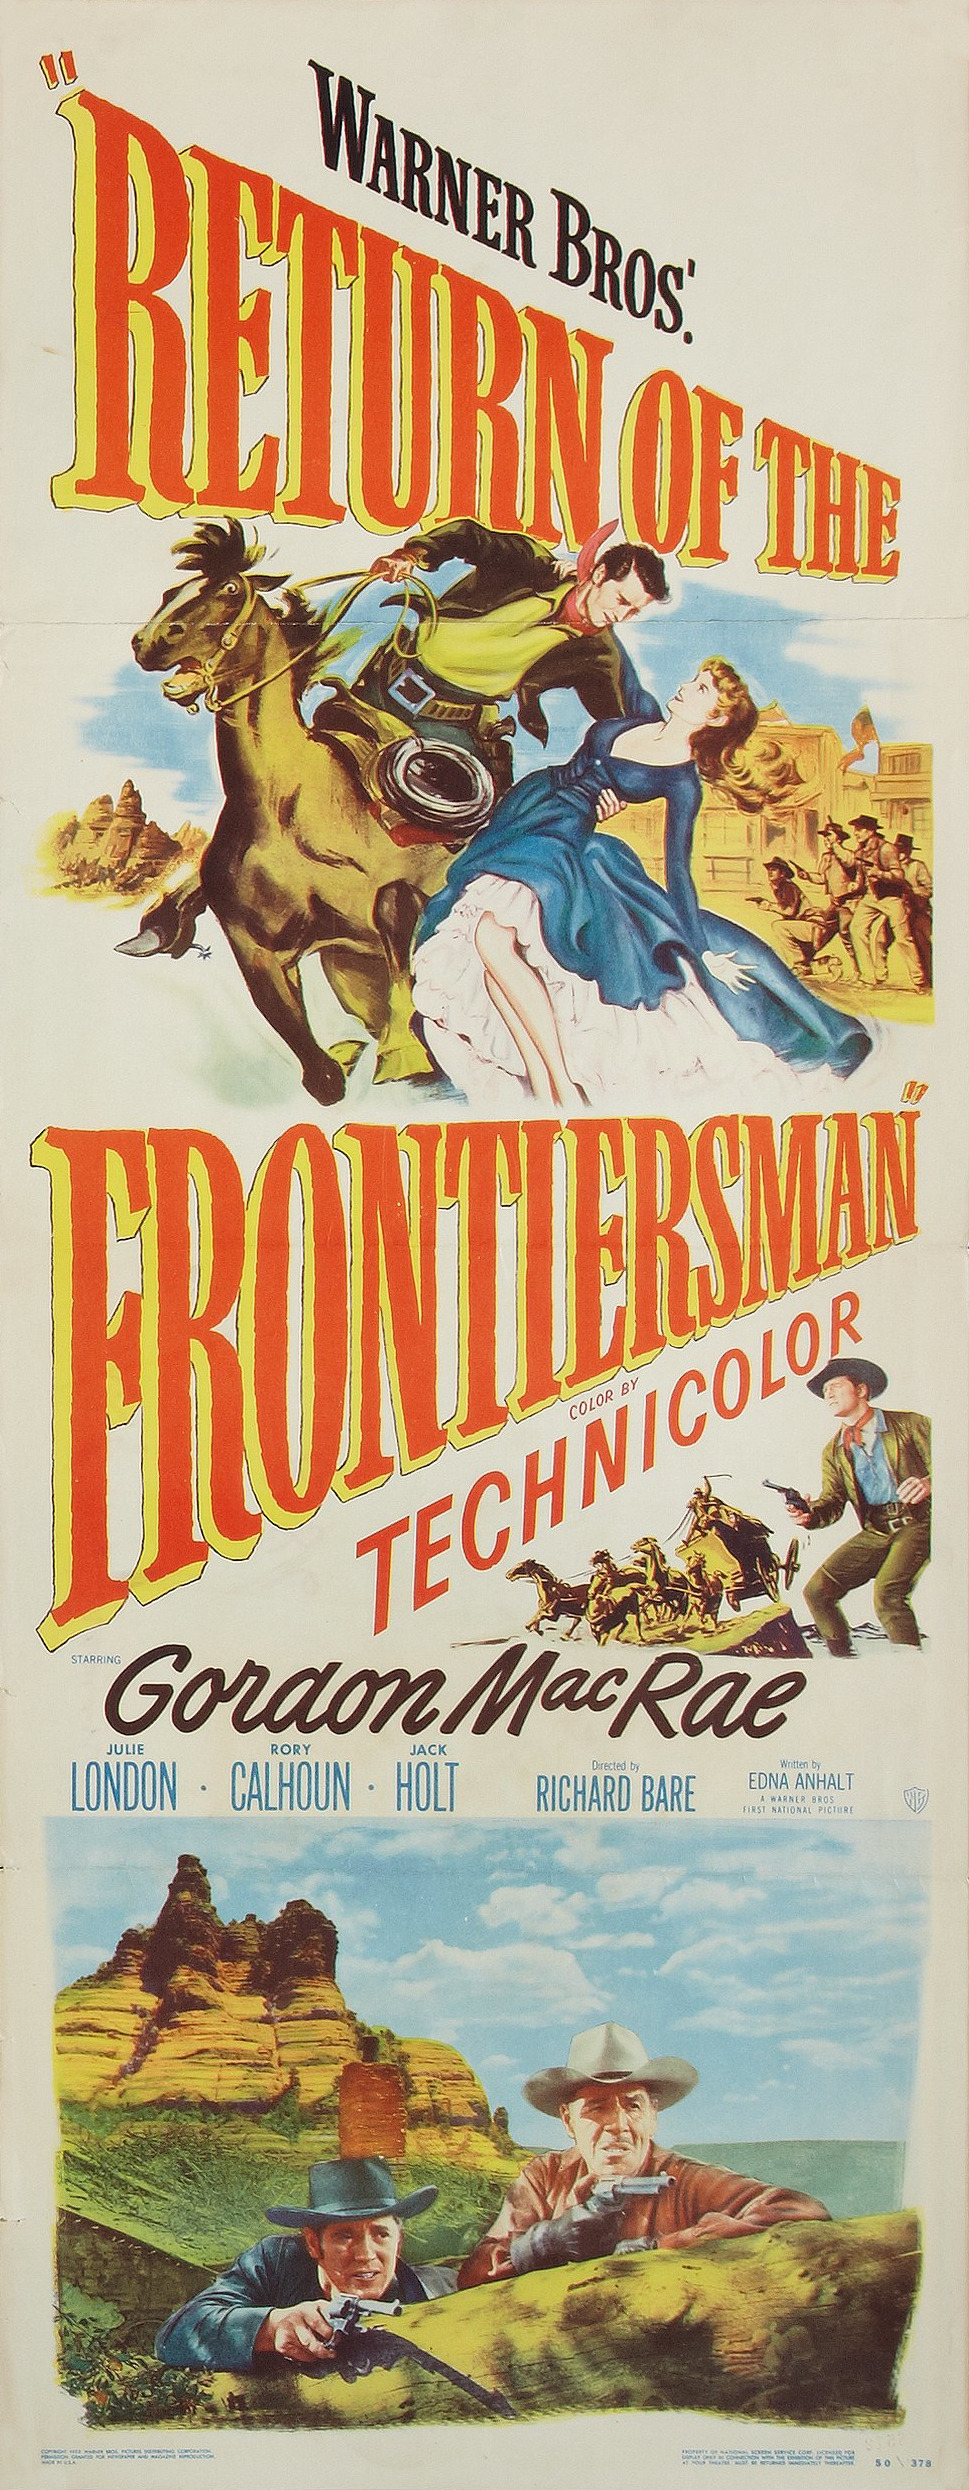 Mega Sized Movie Poster Image for Return of the Frontiersman (#2 of 2)